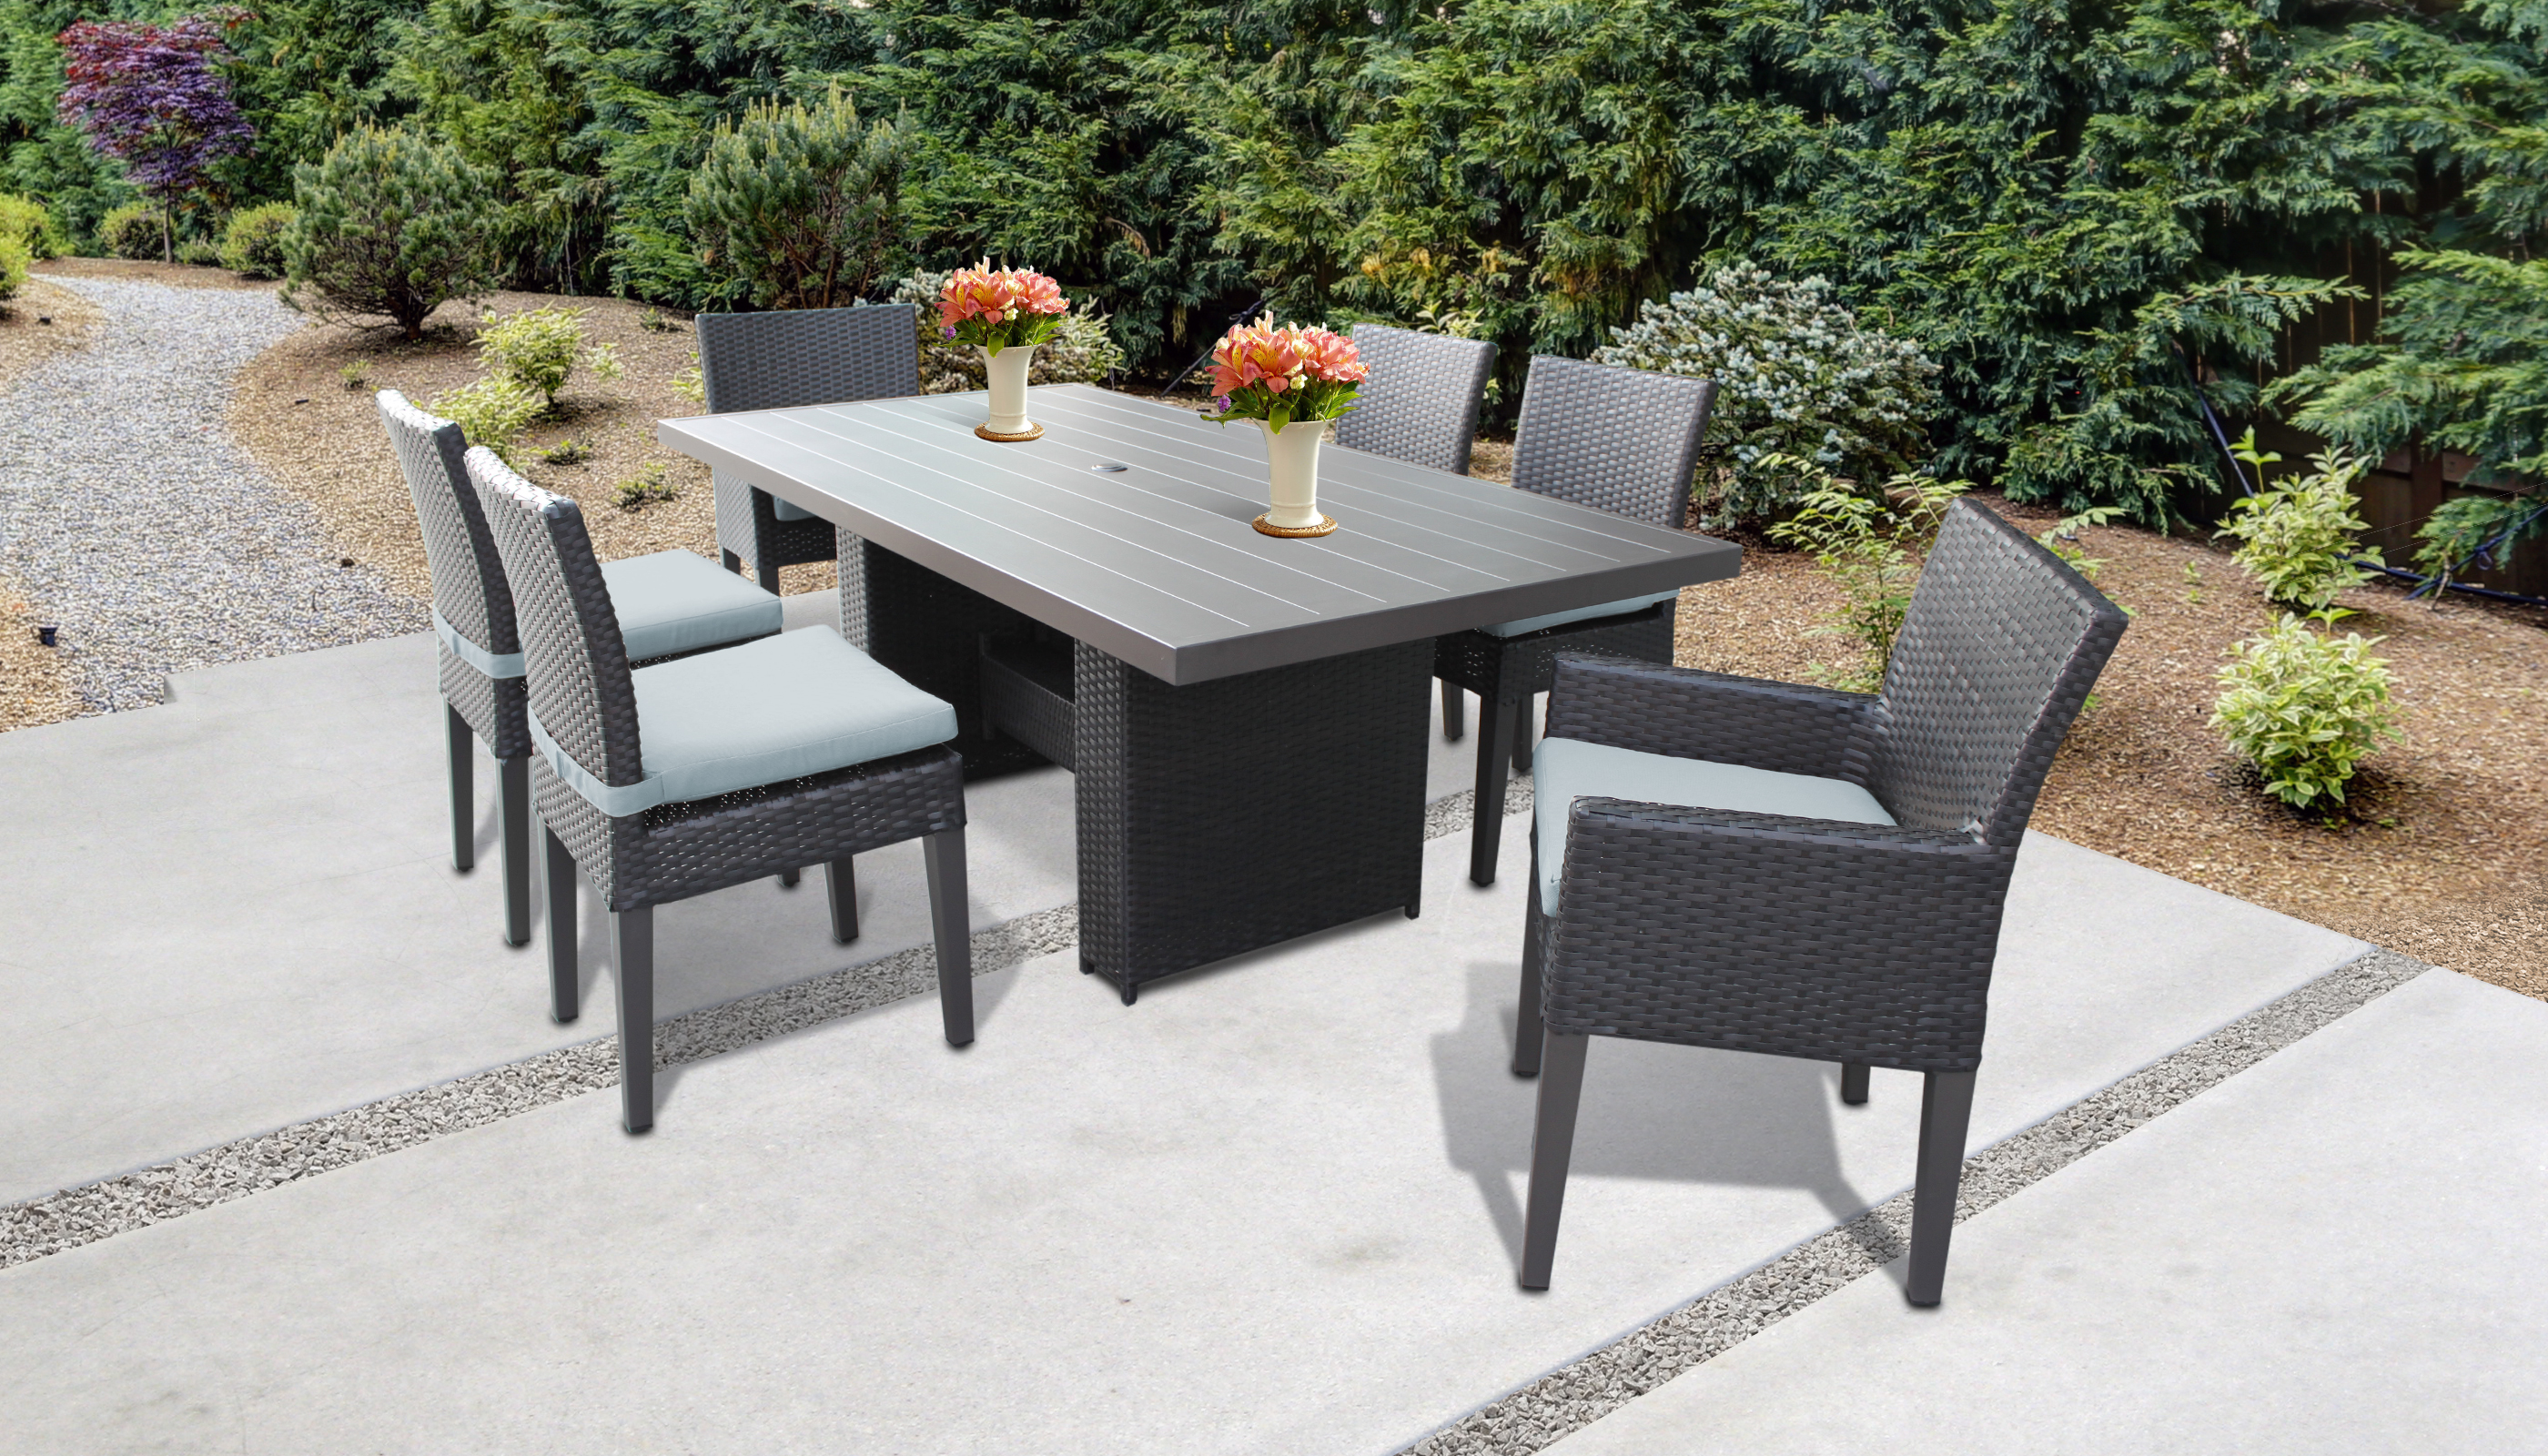 Belle Rectangular Outdoor Patio Dining Table with 4 Armless Chairs and